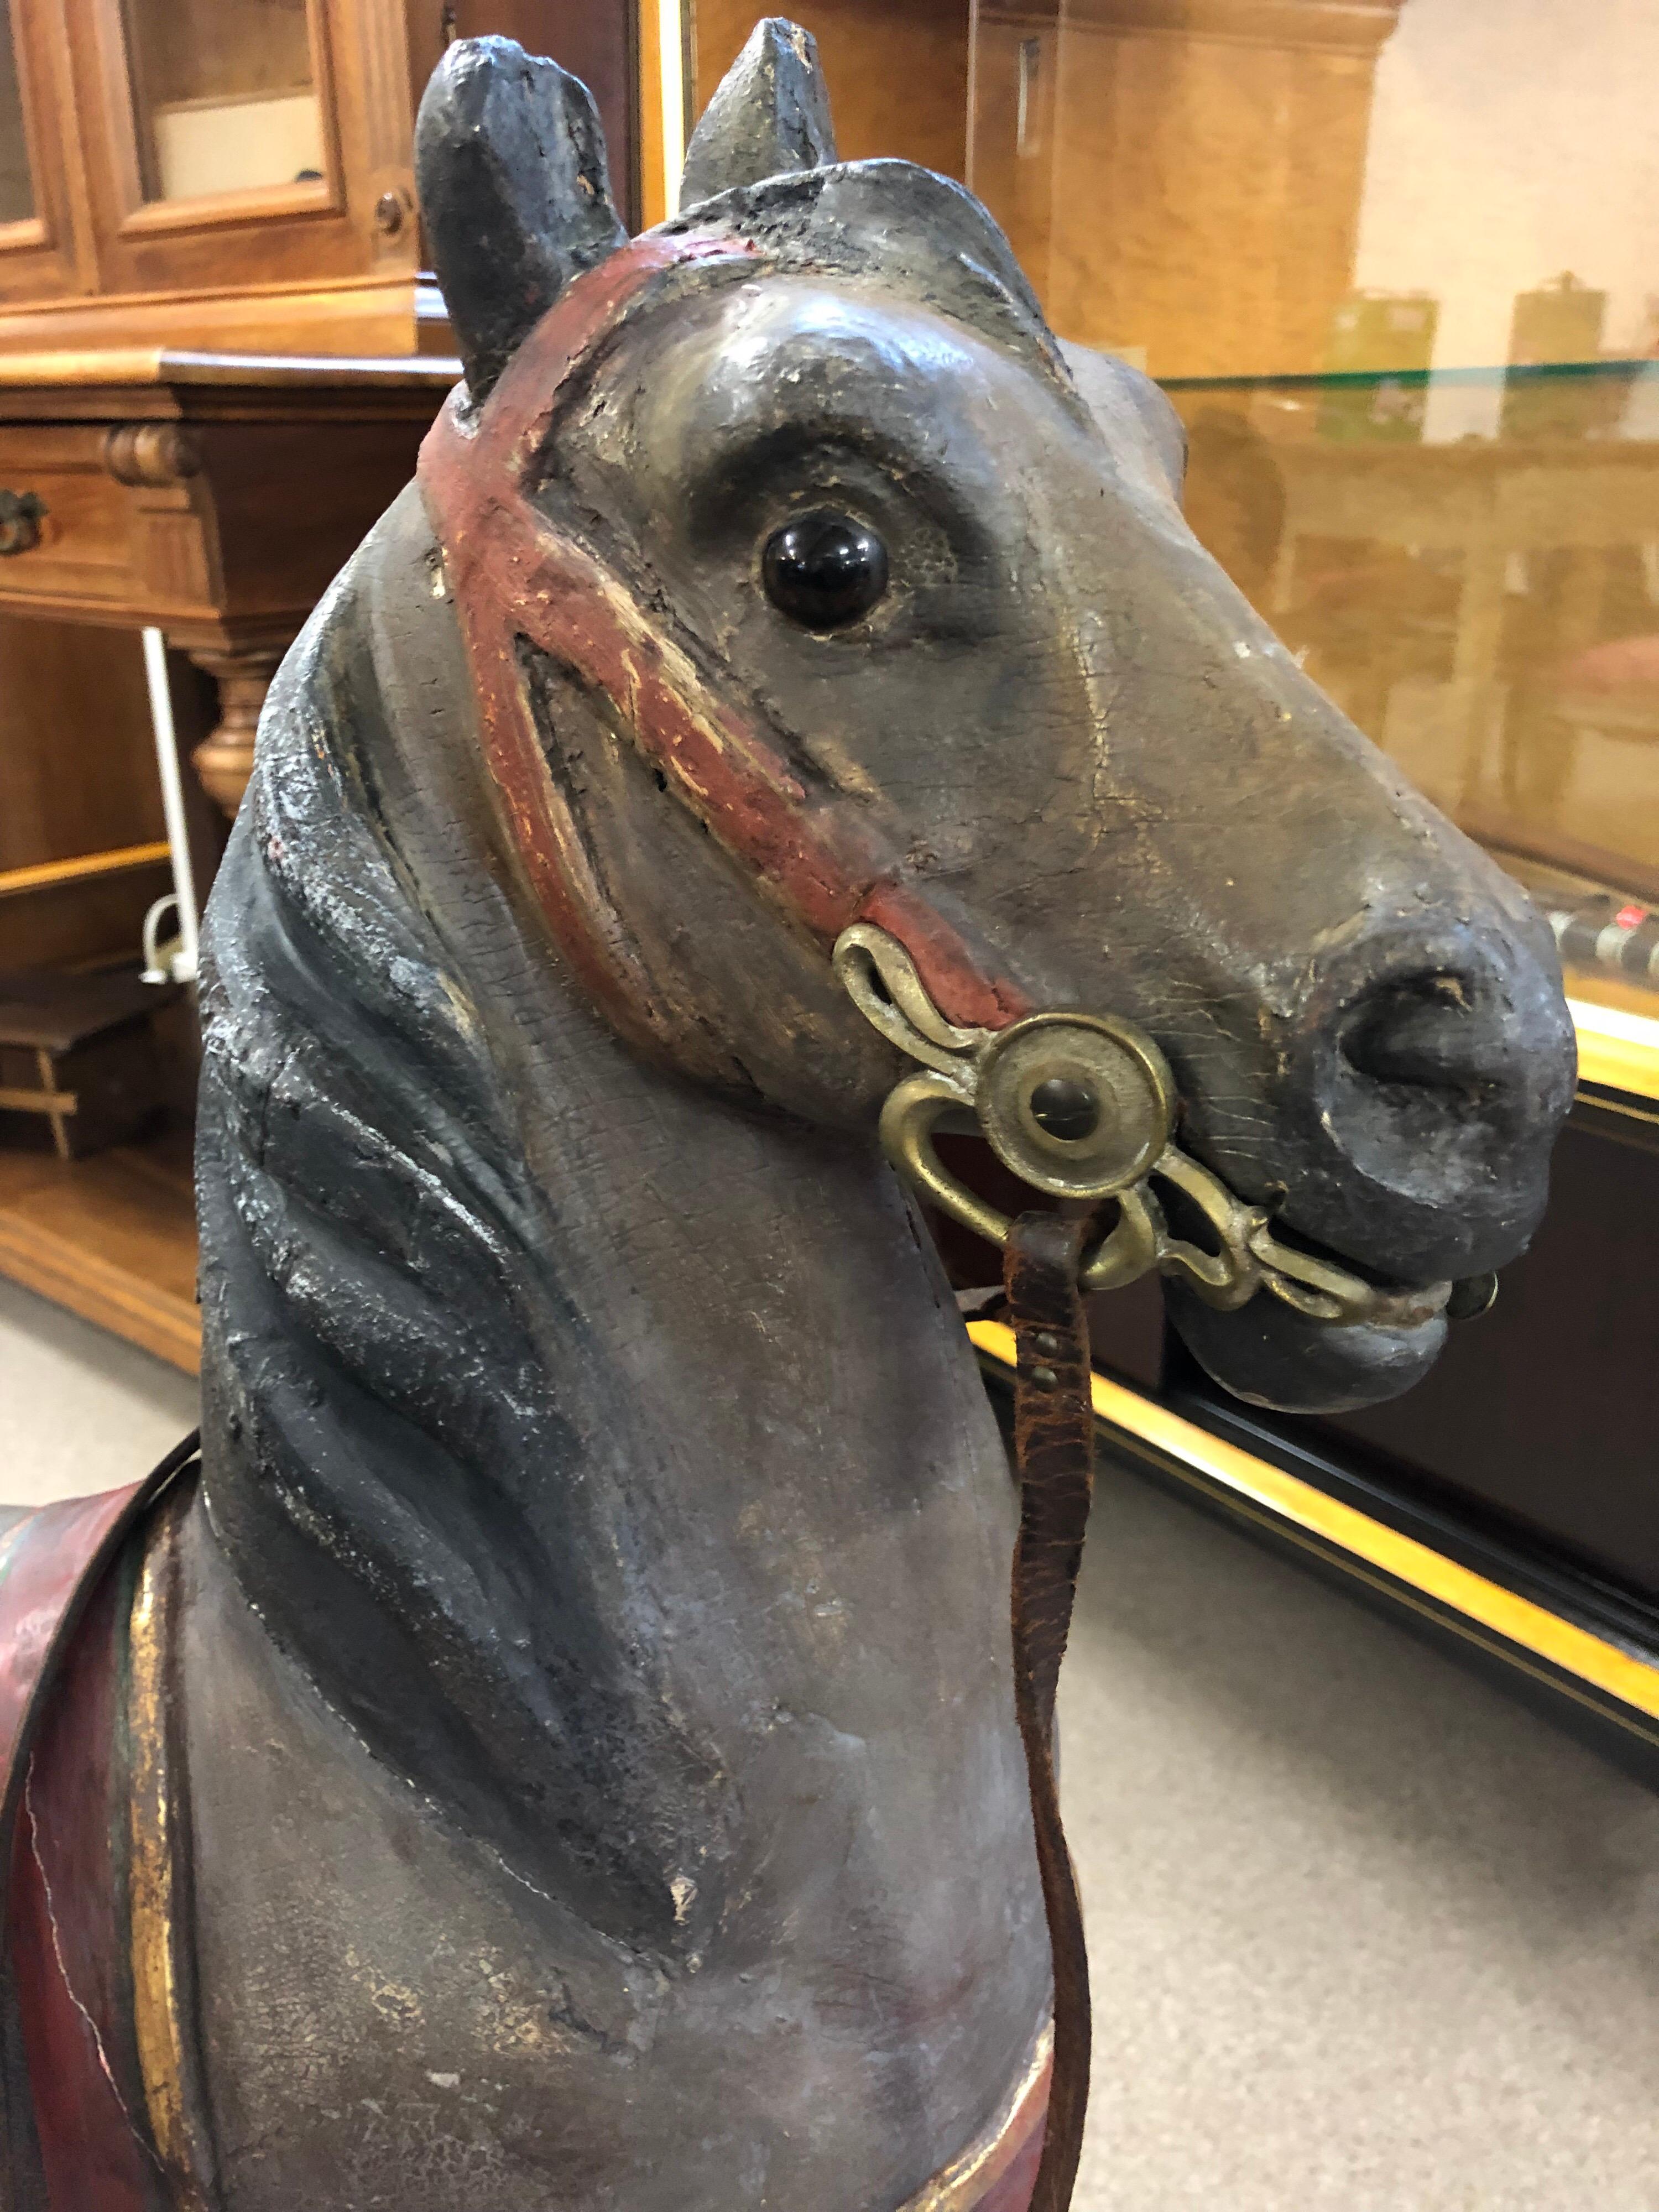 A rocking horse is a child's toy, usually shaped like a horse and mounted on rockers similar to a rocking chair. There are two sorts, the one where the horse part sits rigidly attached to a pair of curved rockers that are in contact with the ground,